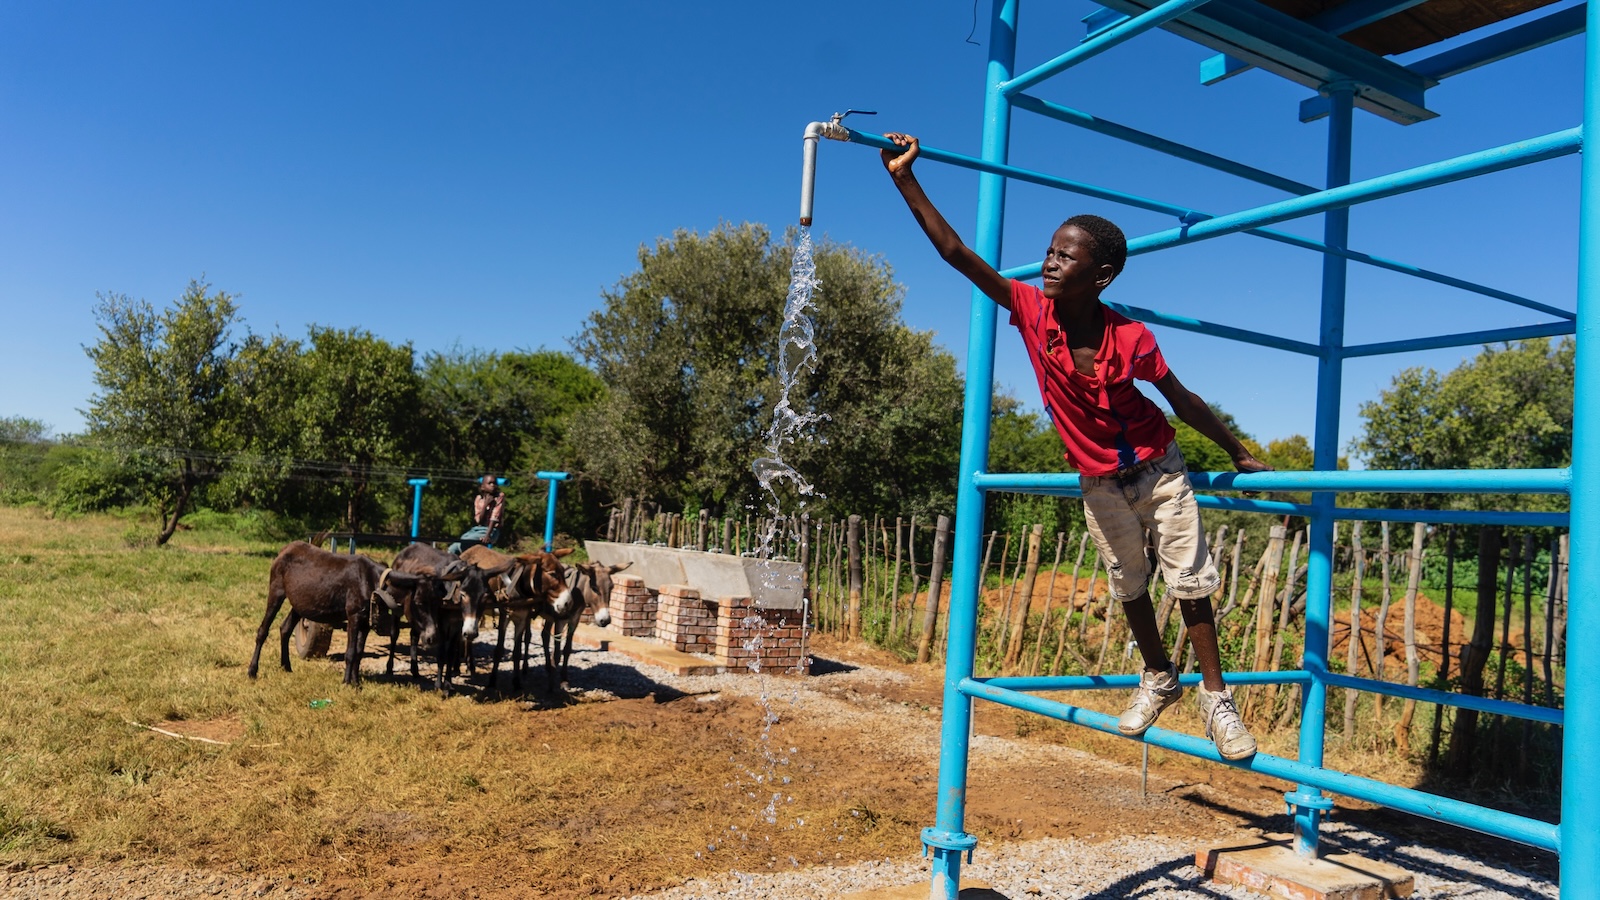 A young boy climbs on a pump assembly as water flows from a spigot in a livestock field in Nyamandlovu, Zimbabwe.